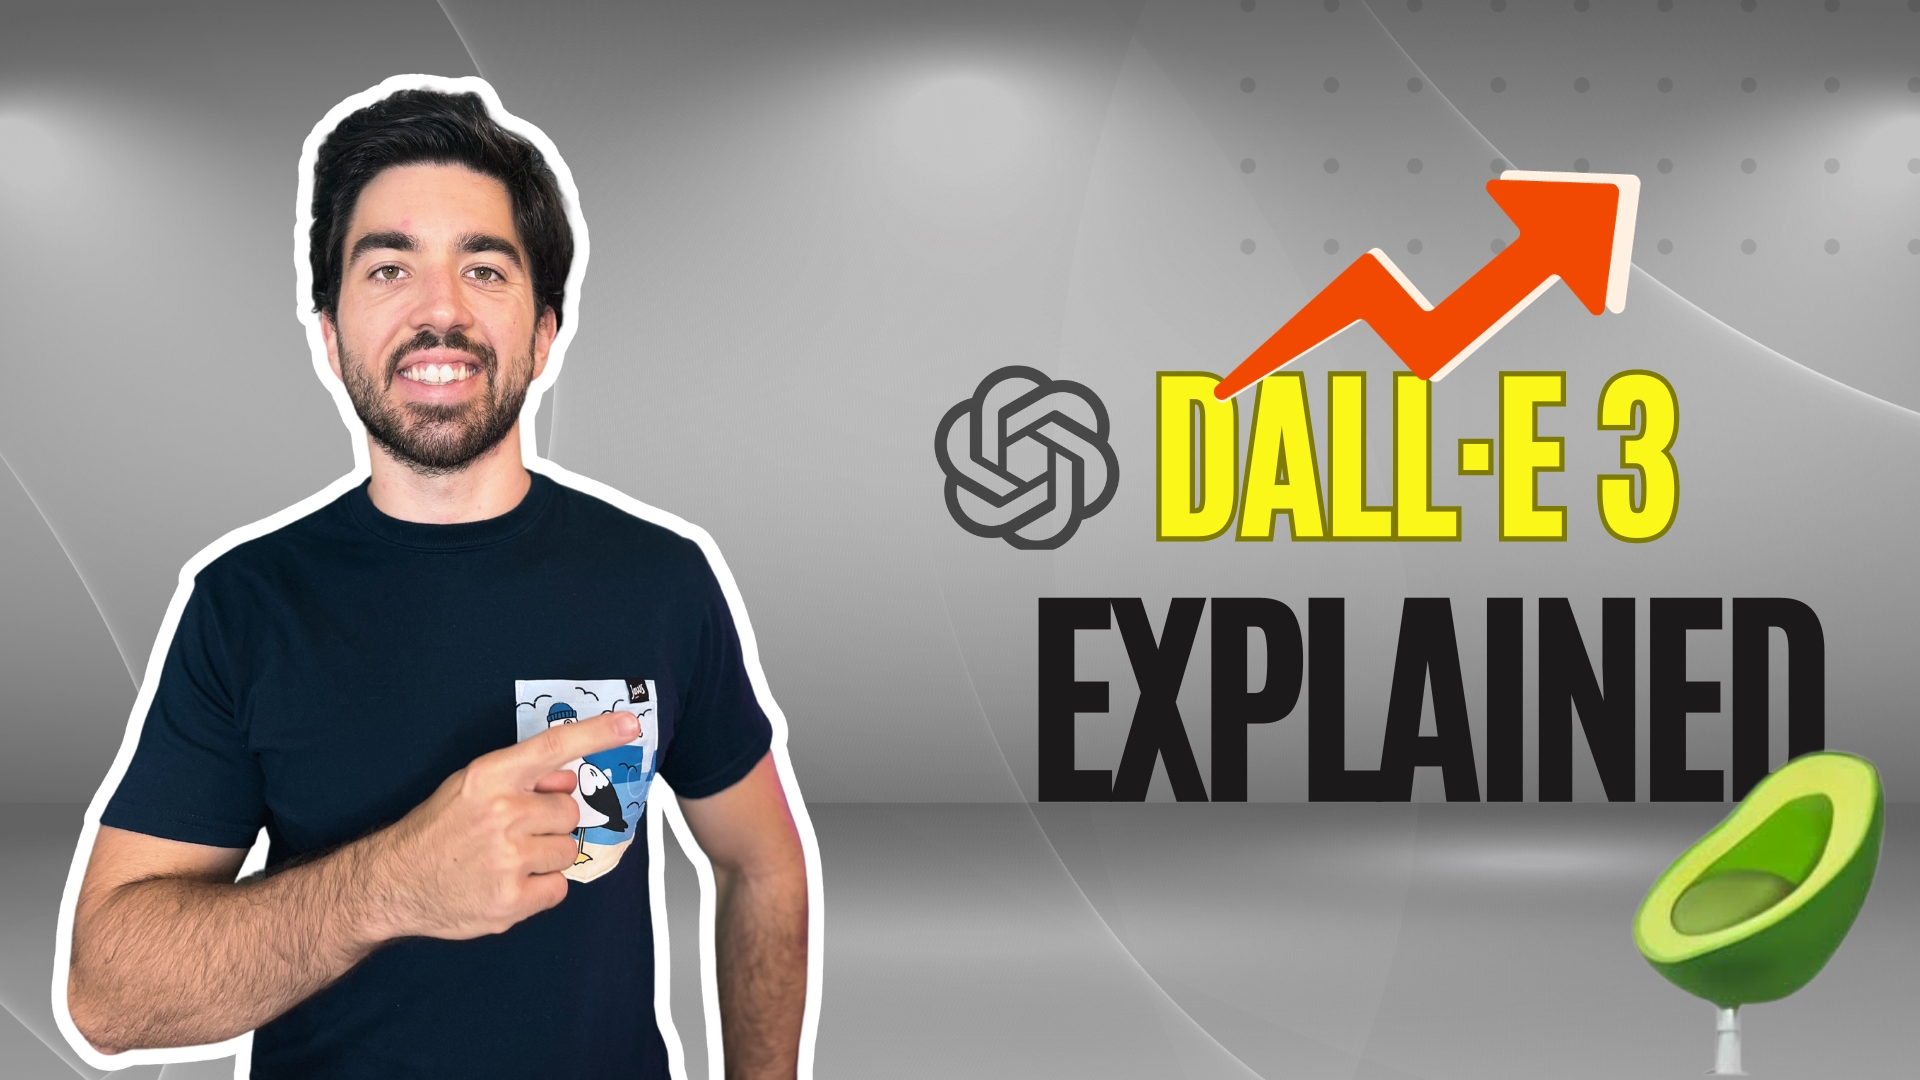 DALLE 3 Explained: Improving Image Generation with Better Captions